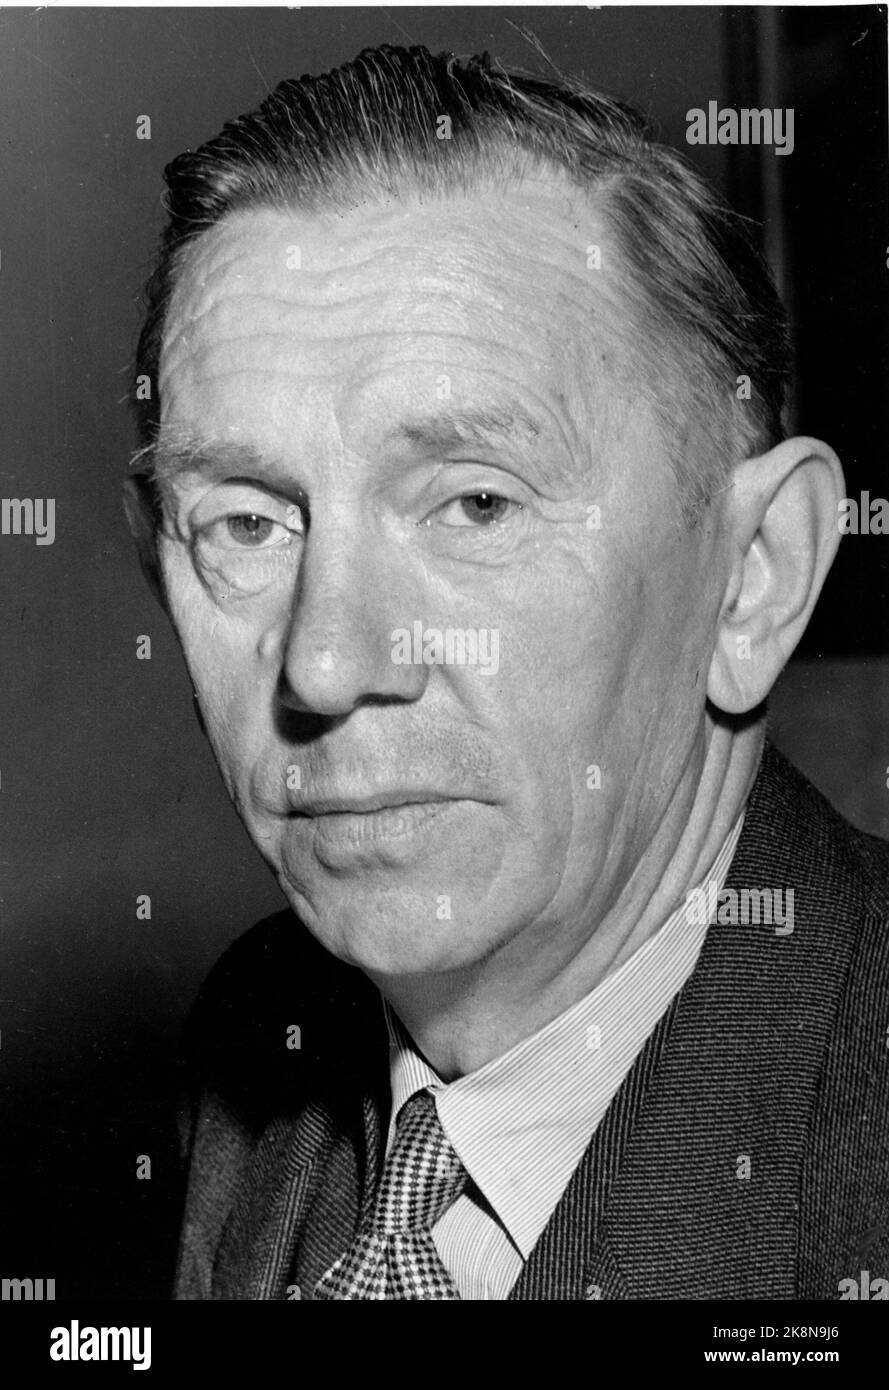 Oscar Torp (1893-1958) Norway's prime minister from 19/11-1951 to 22/1-1955. He was chairman of the Labor Party 1923-1945, Mayor of Oslo 1935-36. Storting representative 1950-53, 1954-58, Storting President 1955-1958. Has also been Minister of Defense, Minister of Social Affairs, Minister of Security, Finance Minister. Photo NTB / NTB Stock Photo